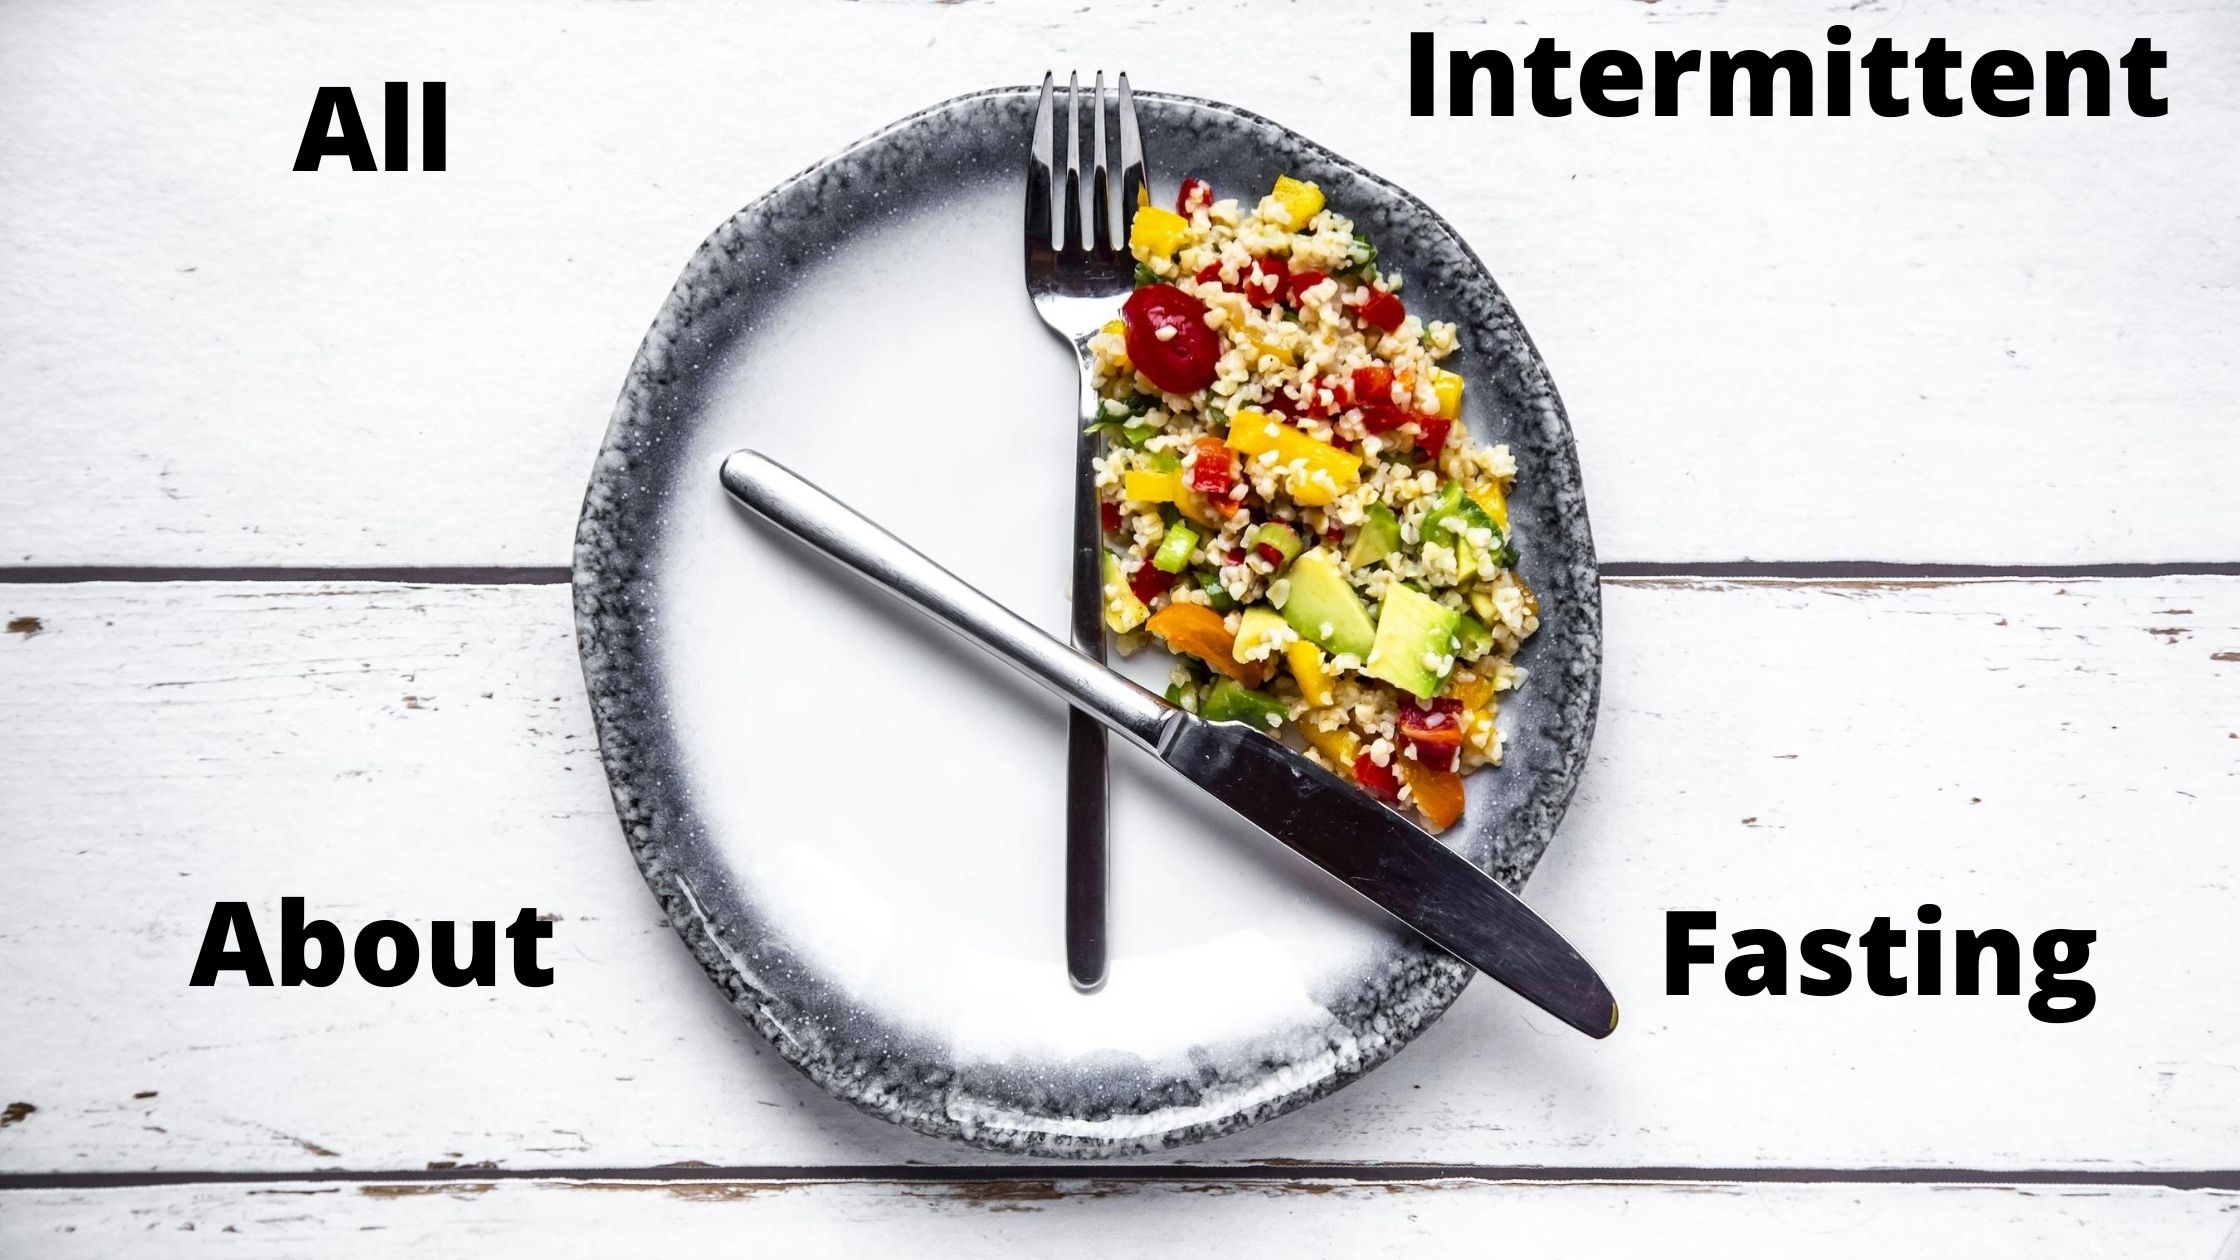 All About Intermittent Fasting - HEALTH REVIEW